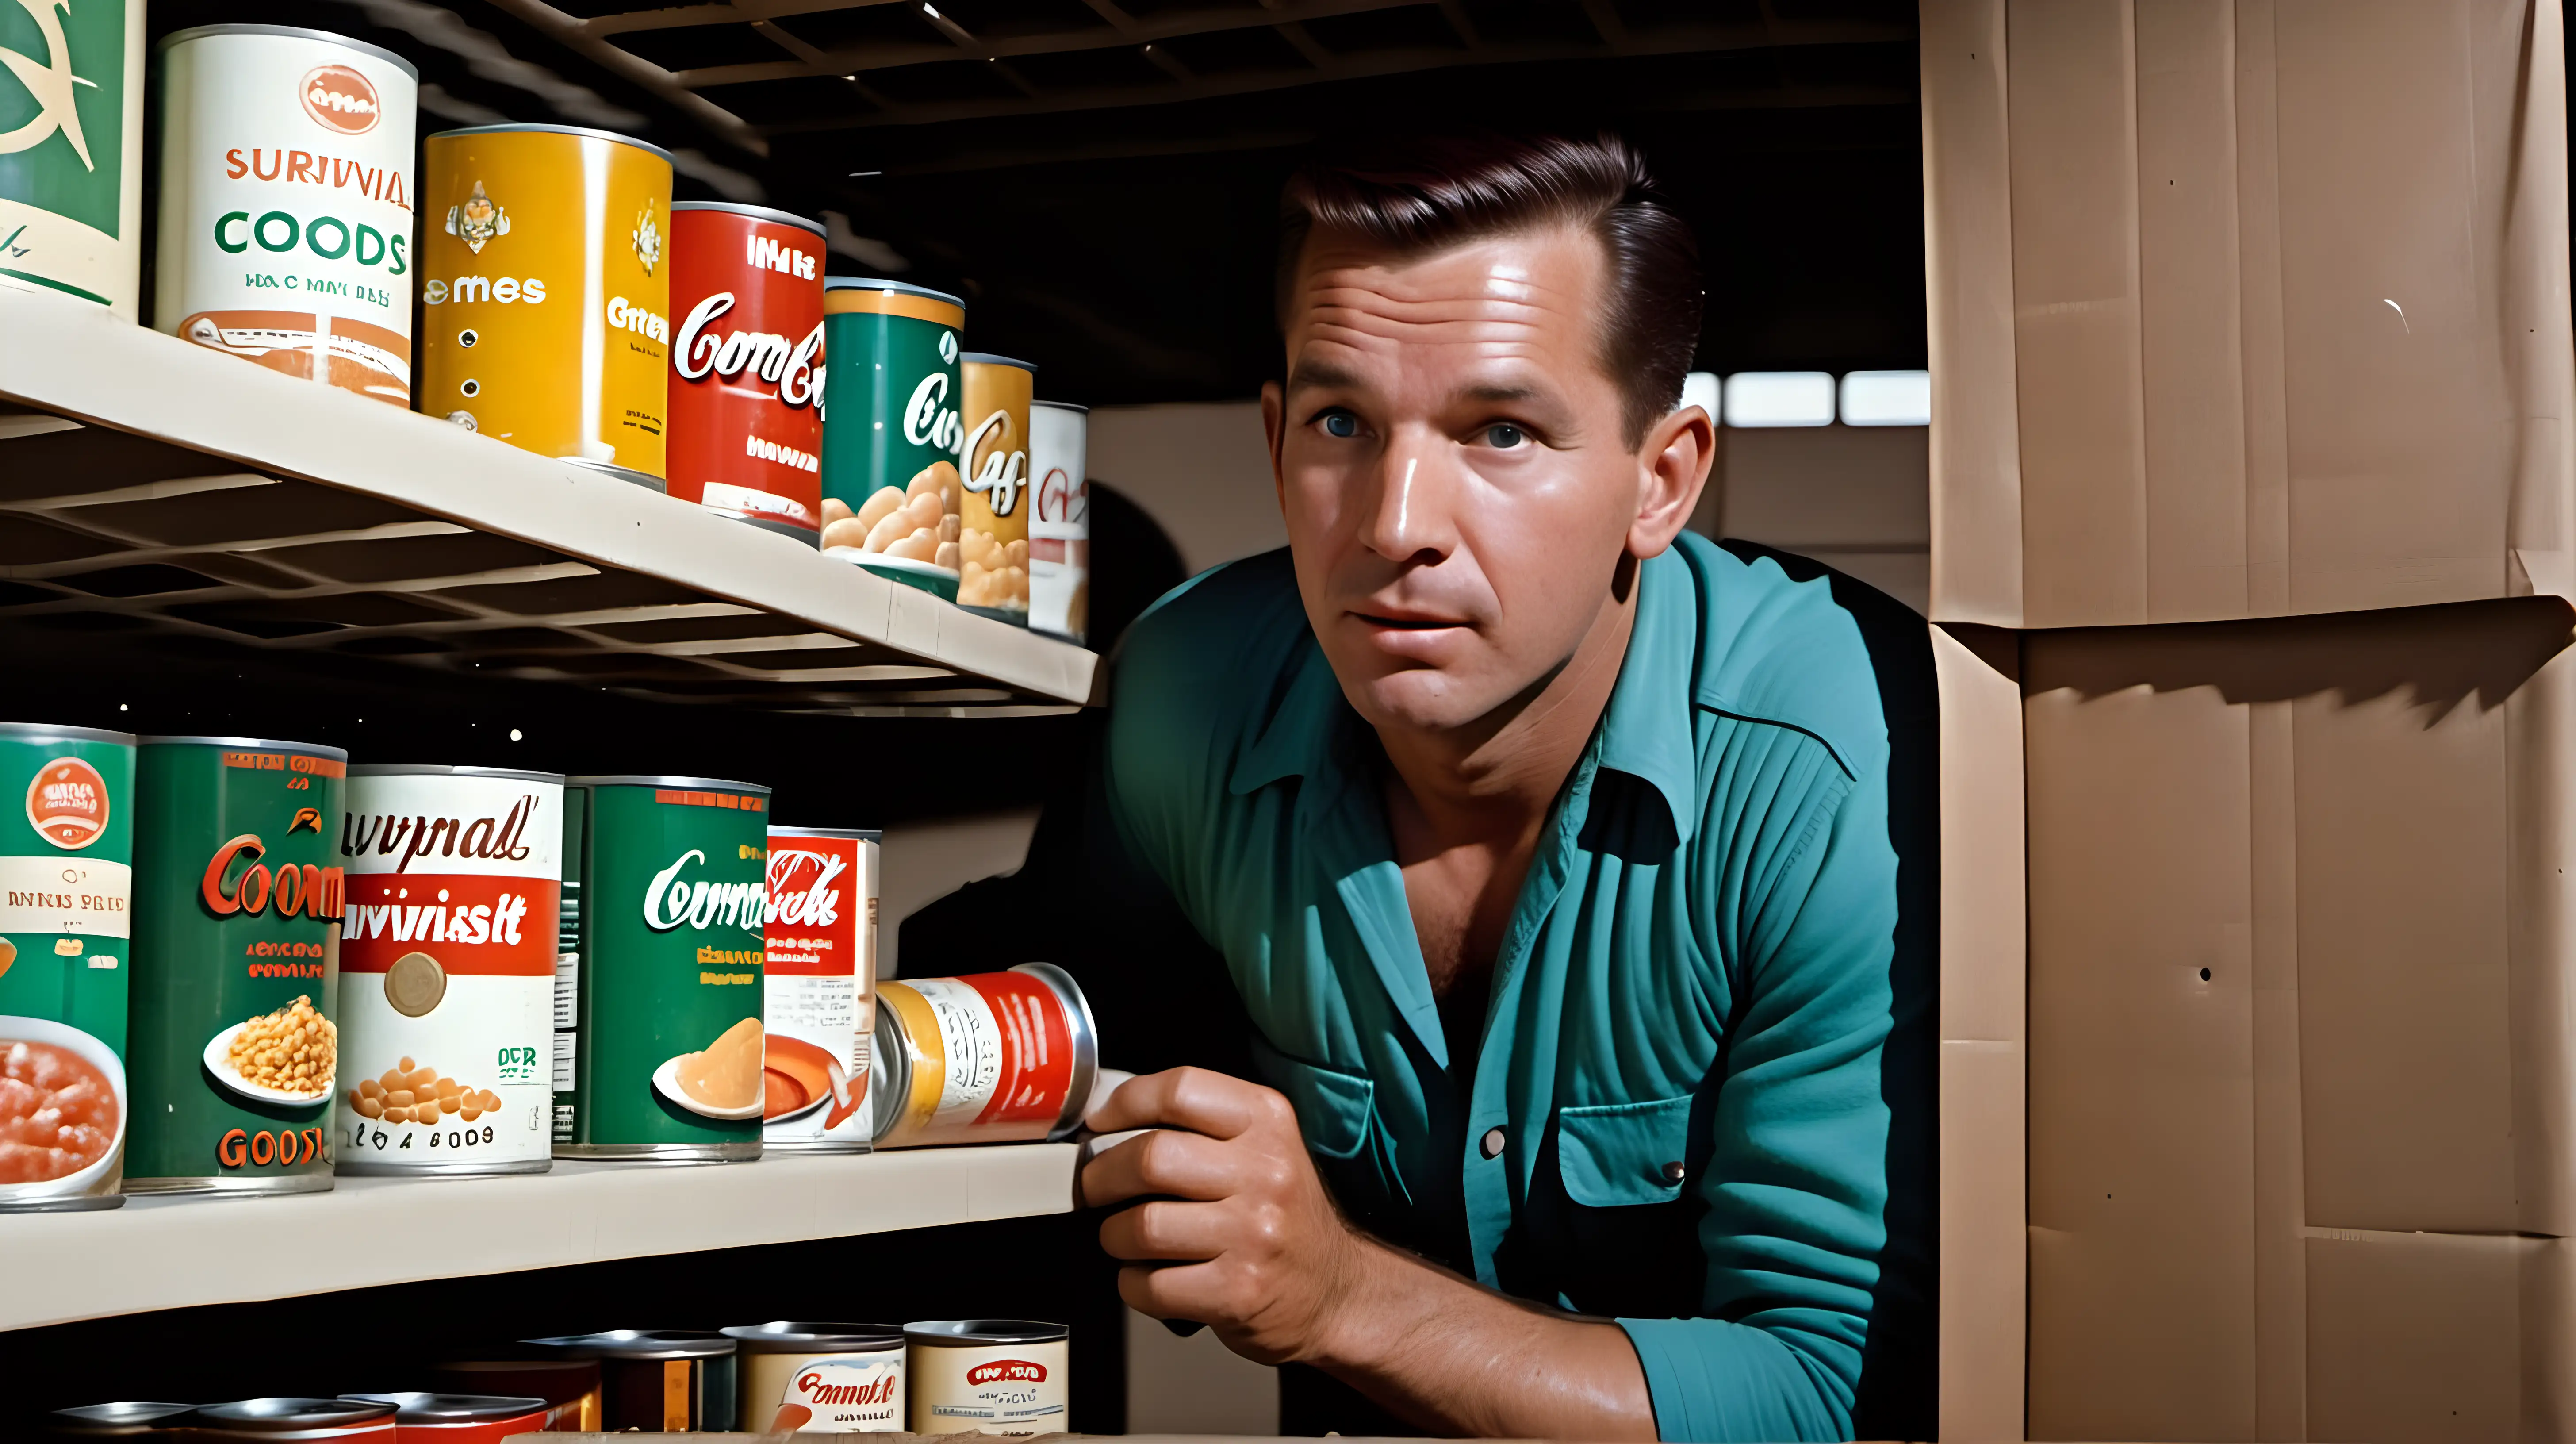 1960's survivalist man in a bunker full of shelves of canned goods. Some of the food falling off the shelf